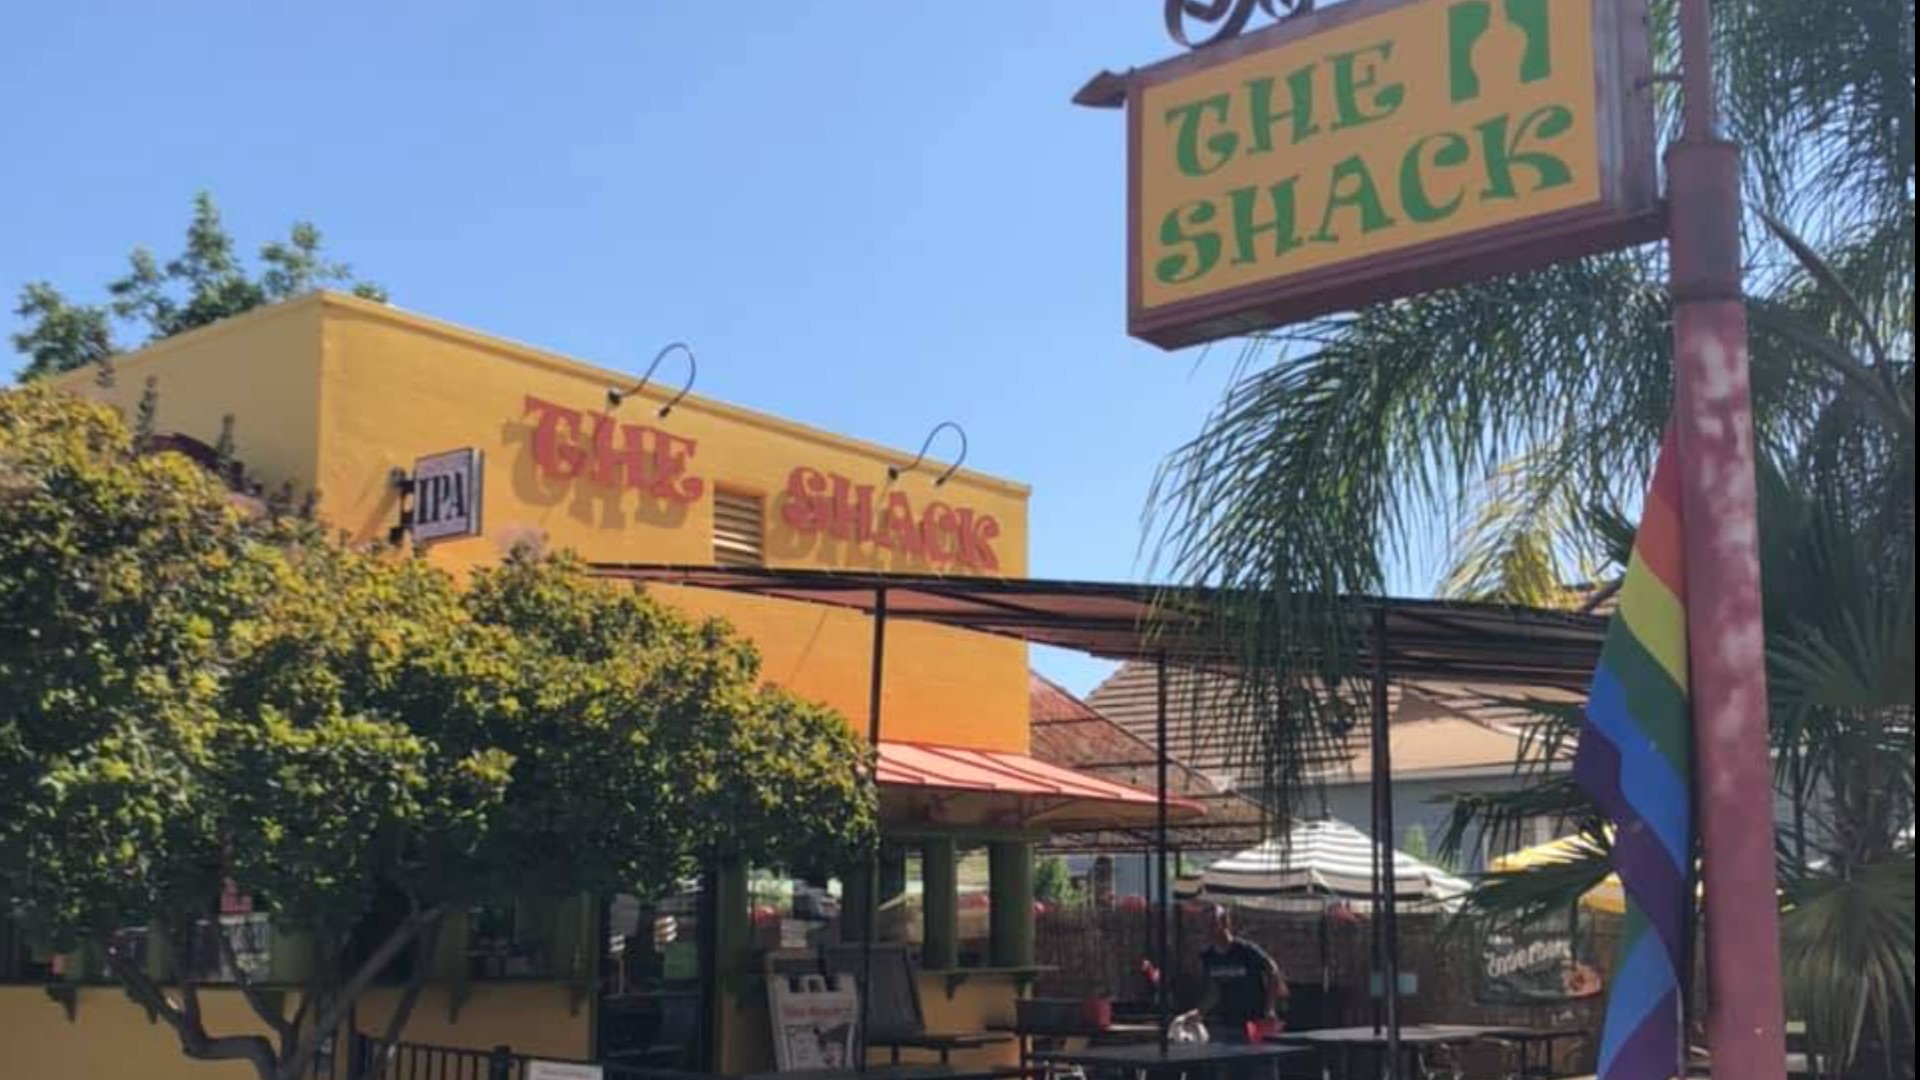 The Shack is an East Sacramento restaurant that's served the community since 1931. Their last day of business will be Sunday, July 31.